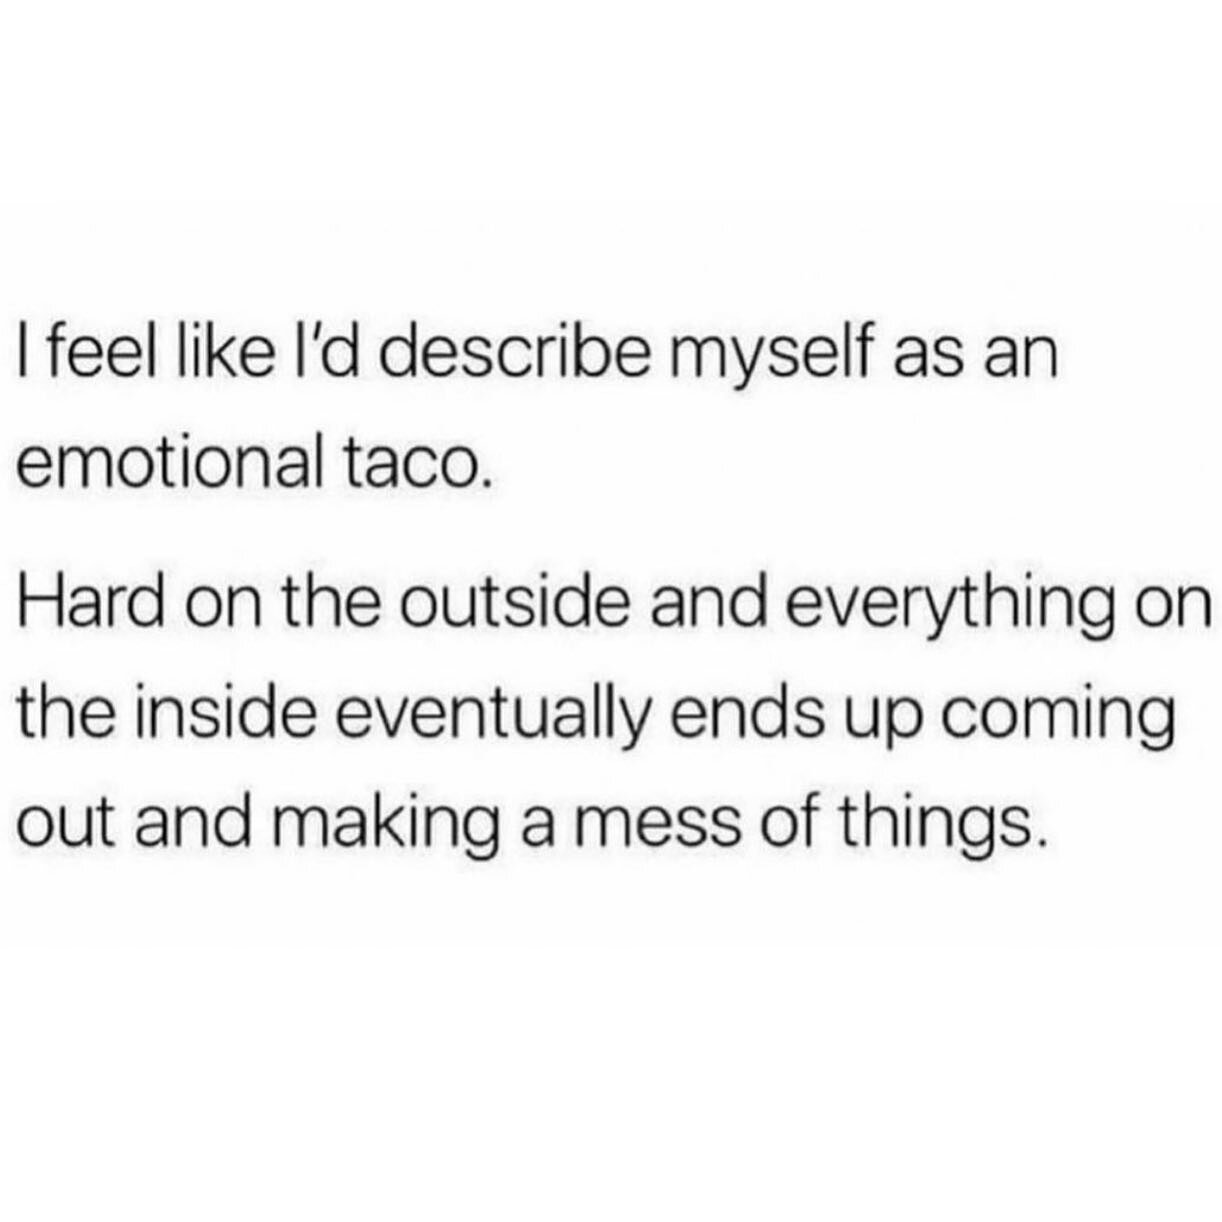 1. Raise your hand if you&rsquo;re an emotional taco
2. If you&rsquo;re not already I highly recommend following @createthelove
Via @createthelove